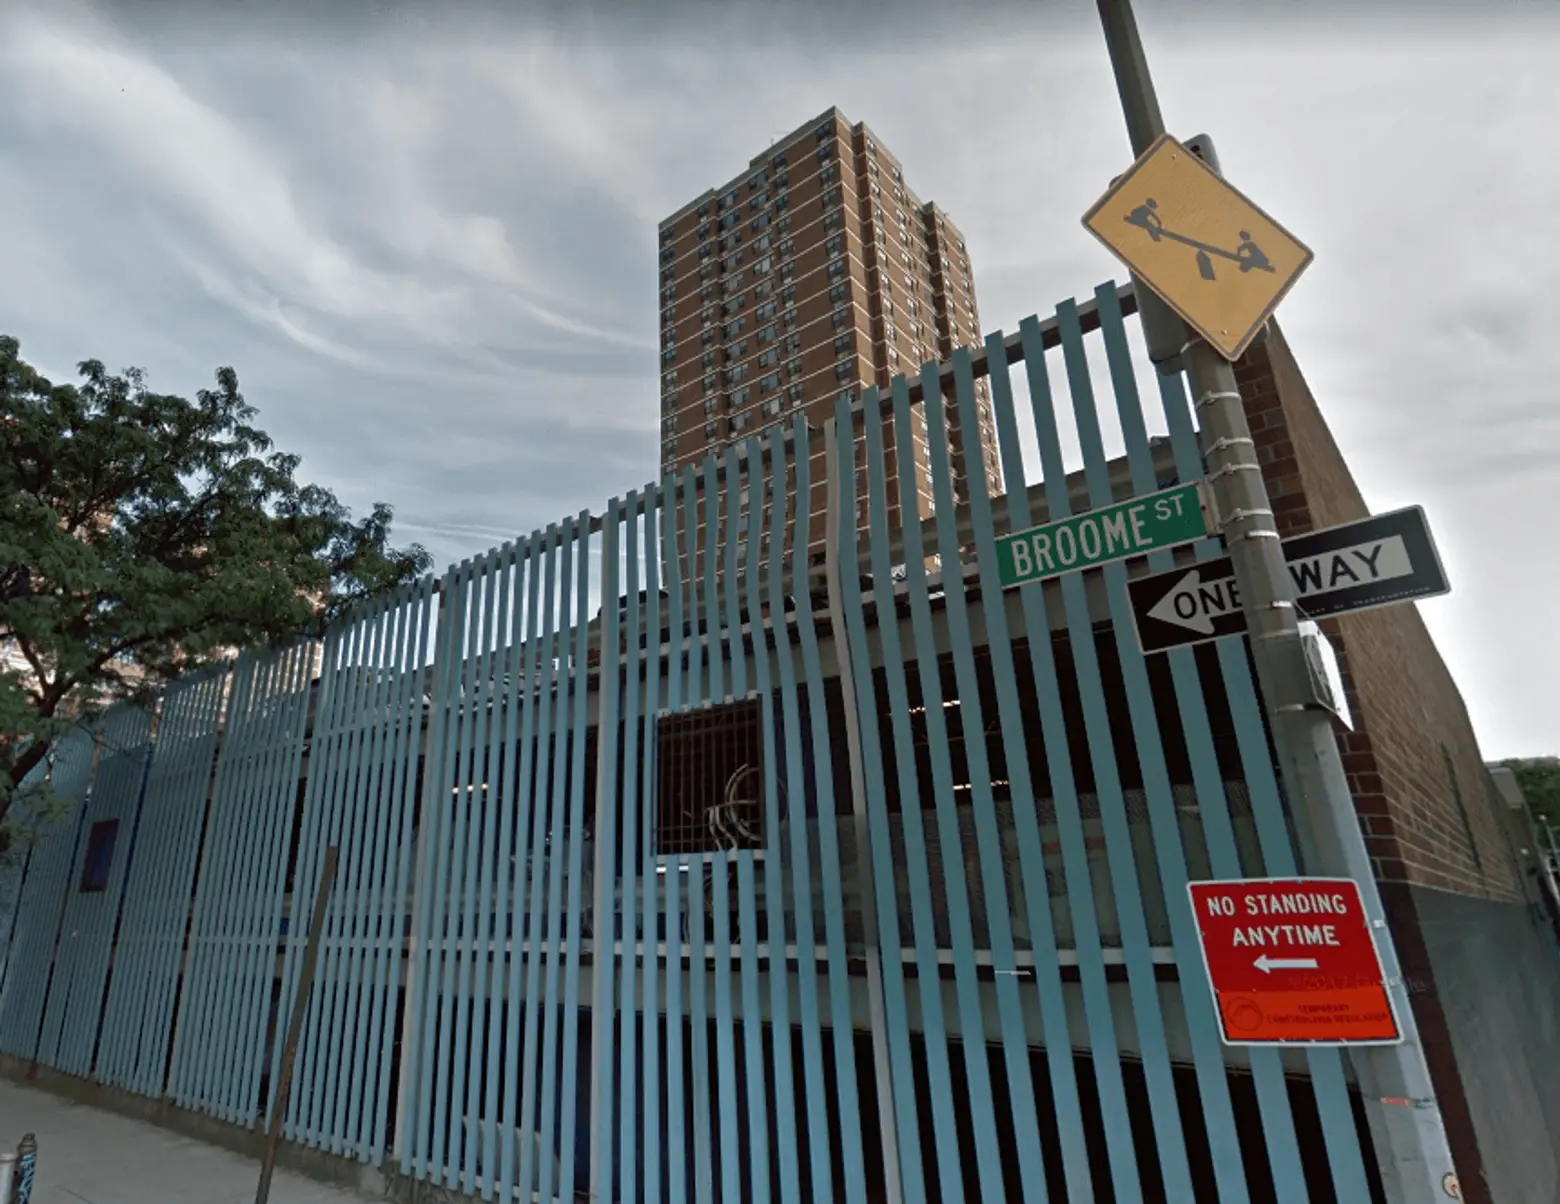 Two new Grand Street Guild towers will bring 400 all-affordable units to the Lower East Side